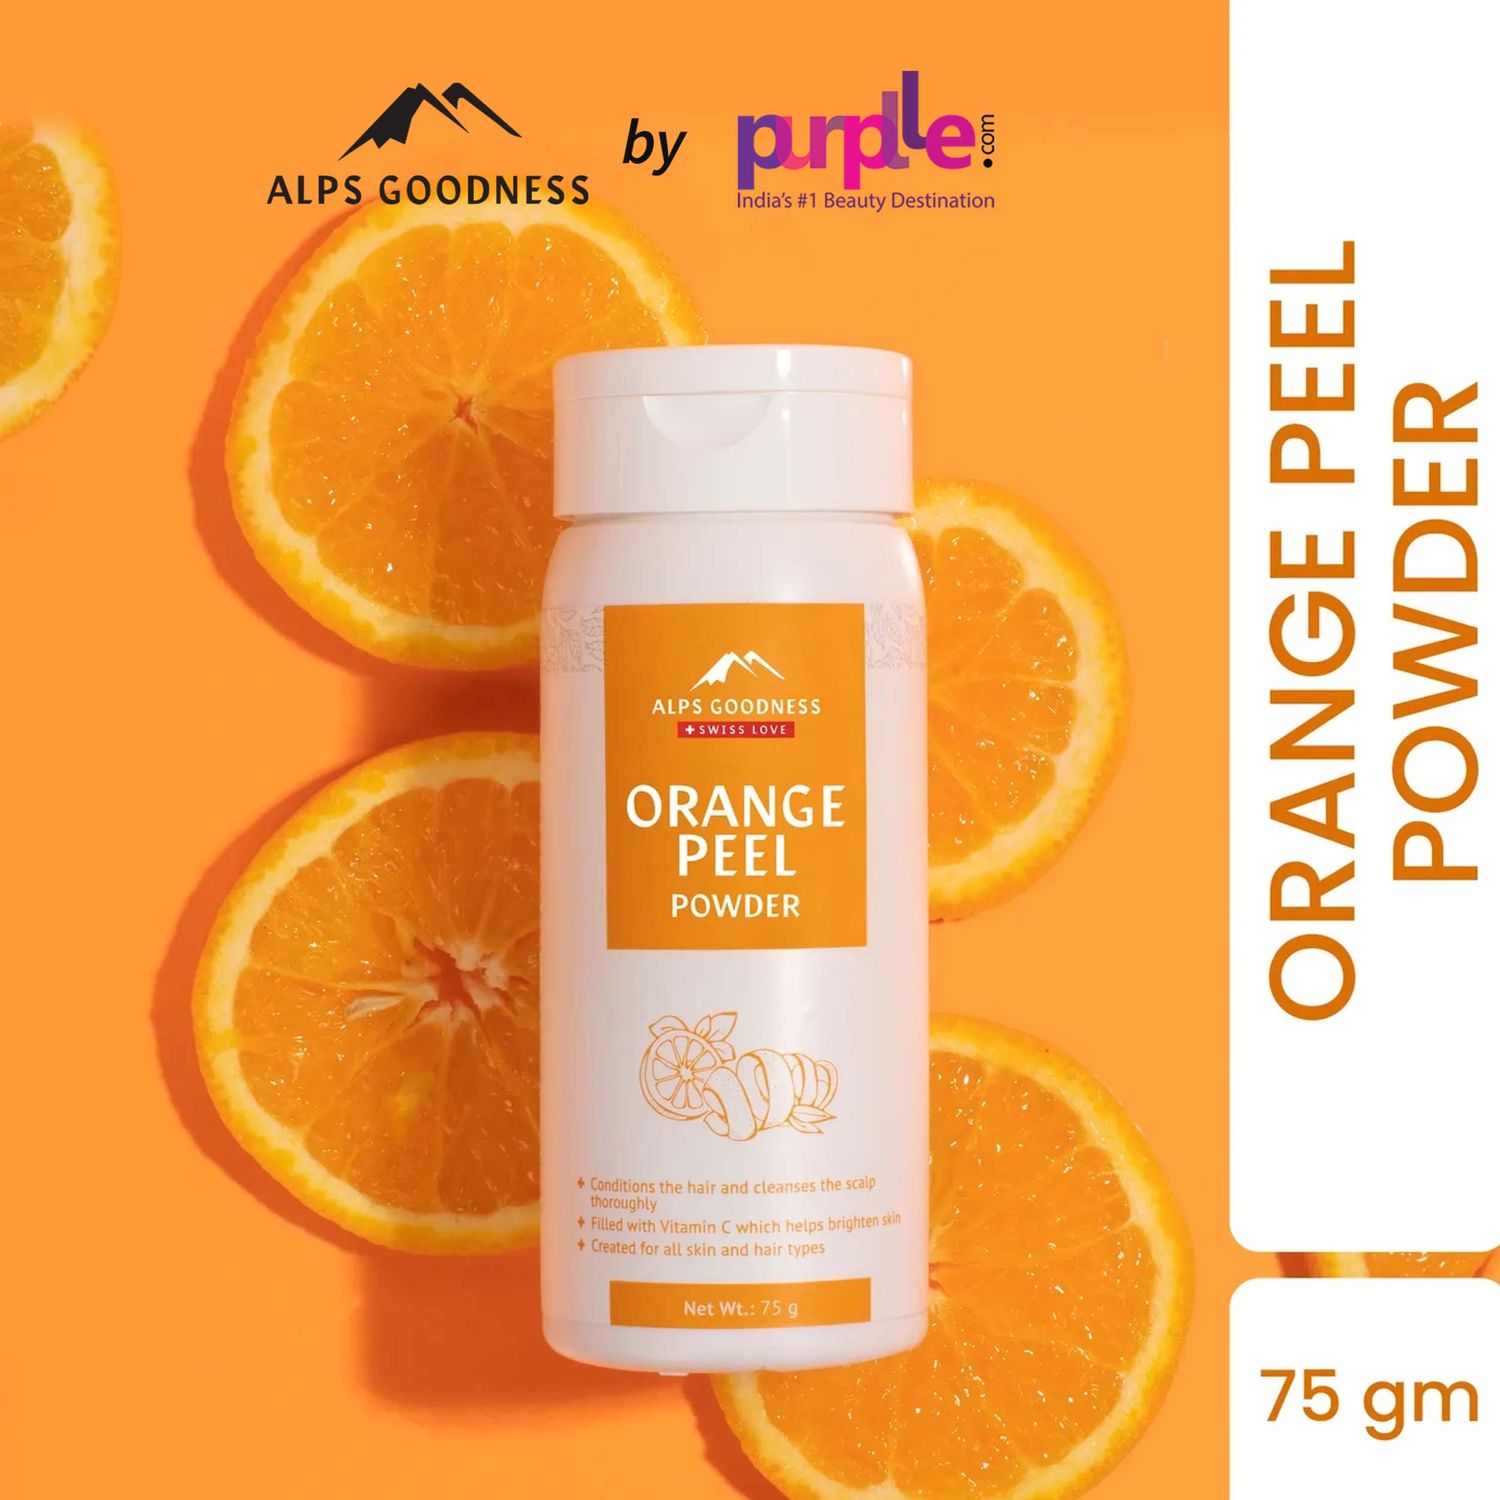 Buy Alps Goodness Powder - Orange Peel (75 g)| 100% Natural Powder | No Chemicals, No Preservatives, No Pesticides | Can be used for Hair Mask and Face Mask | Nourishes hair follicles| Glow Face Pack| Orange Peel Face Pack - Purplle